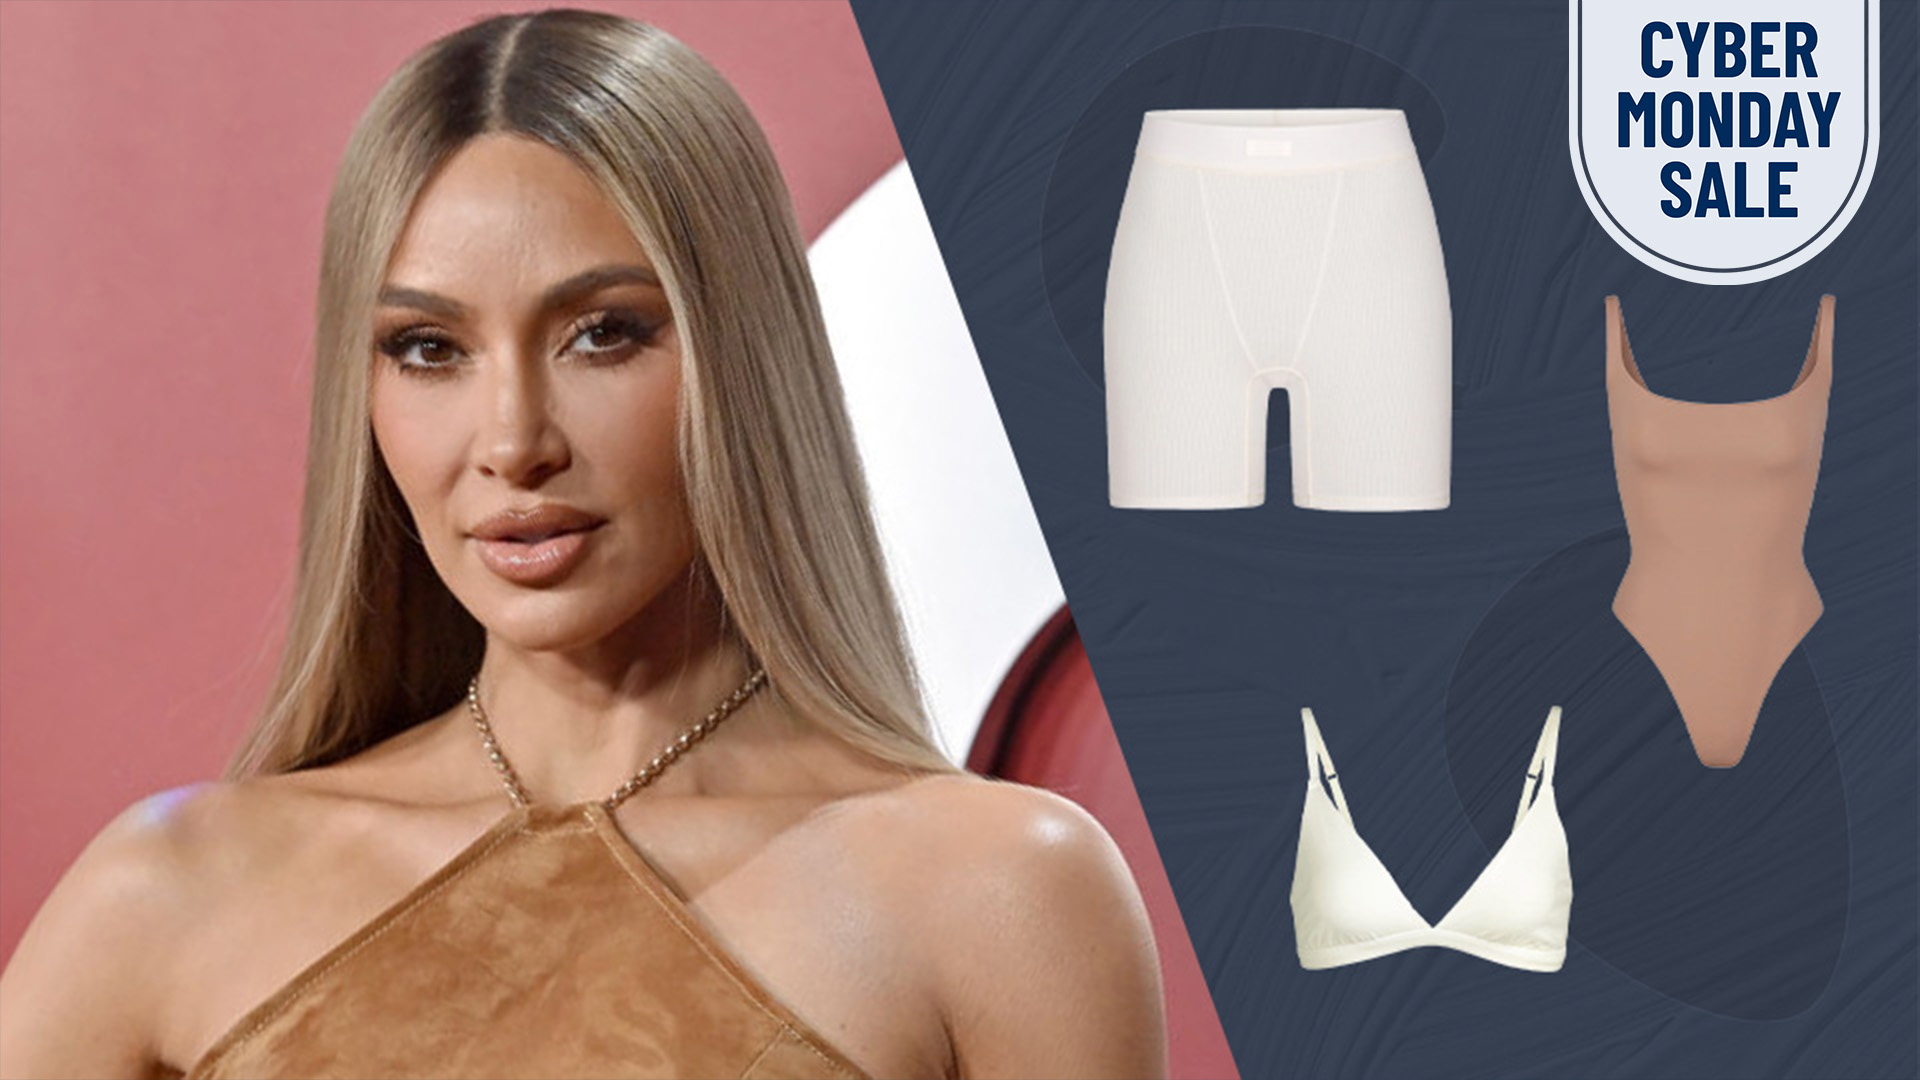 Skims sale: The best discounts and offers on Kim Kardashian's